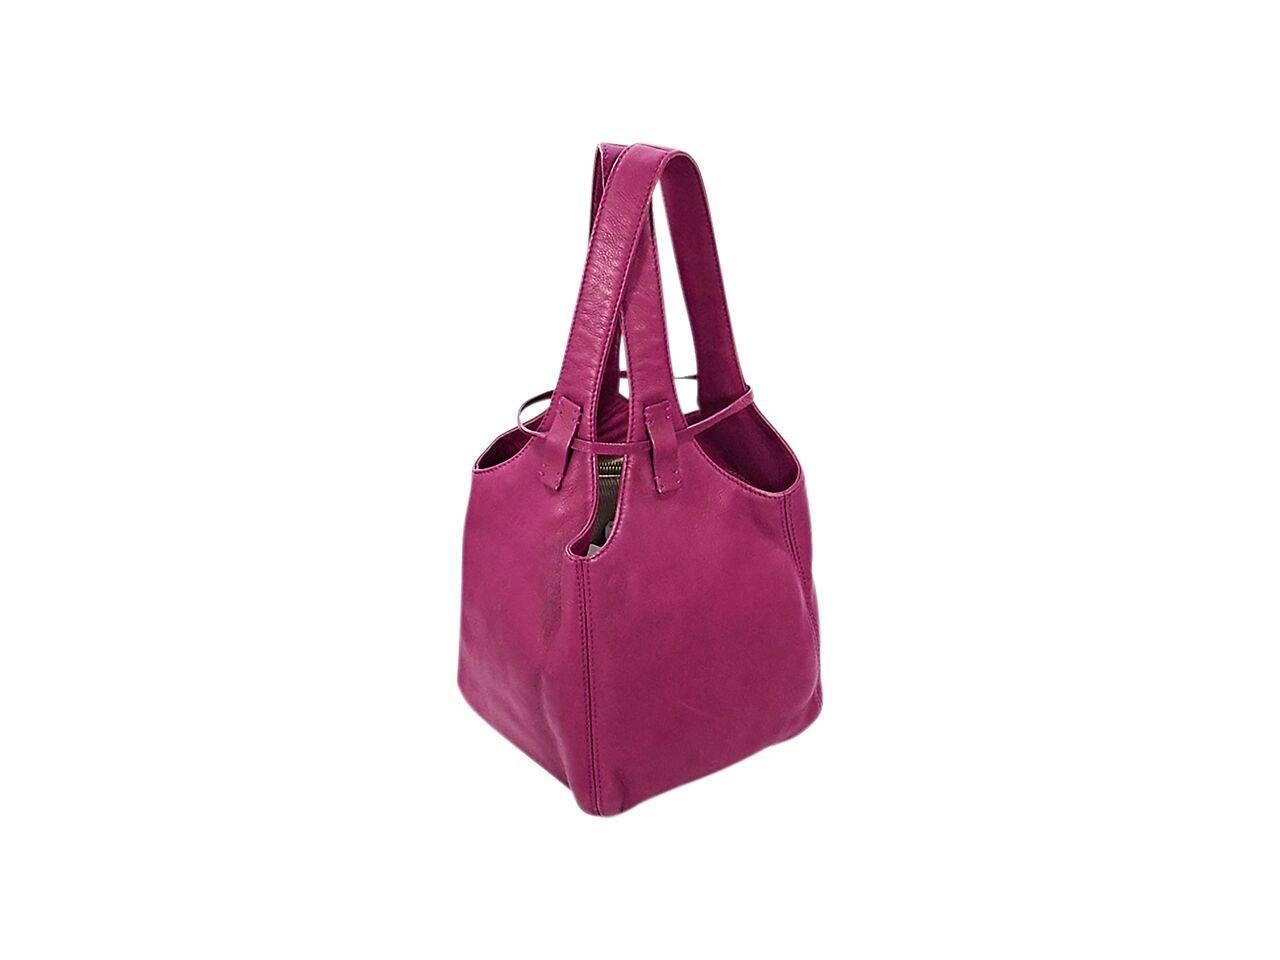 Product details:  Magenta leather bucket bag by Loro Piana.  Crisscross shoulder straps.  Tie closure with hanging lock and charm.  Lined interior with inner zip pocket.  Goldtone hardware.  7